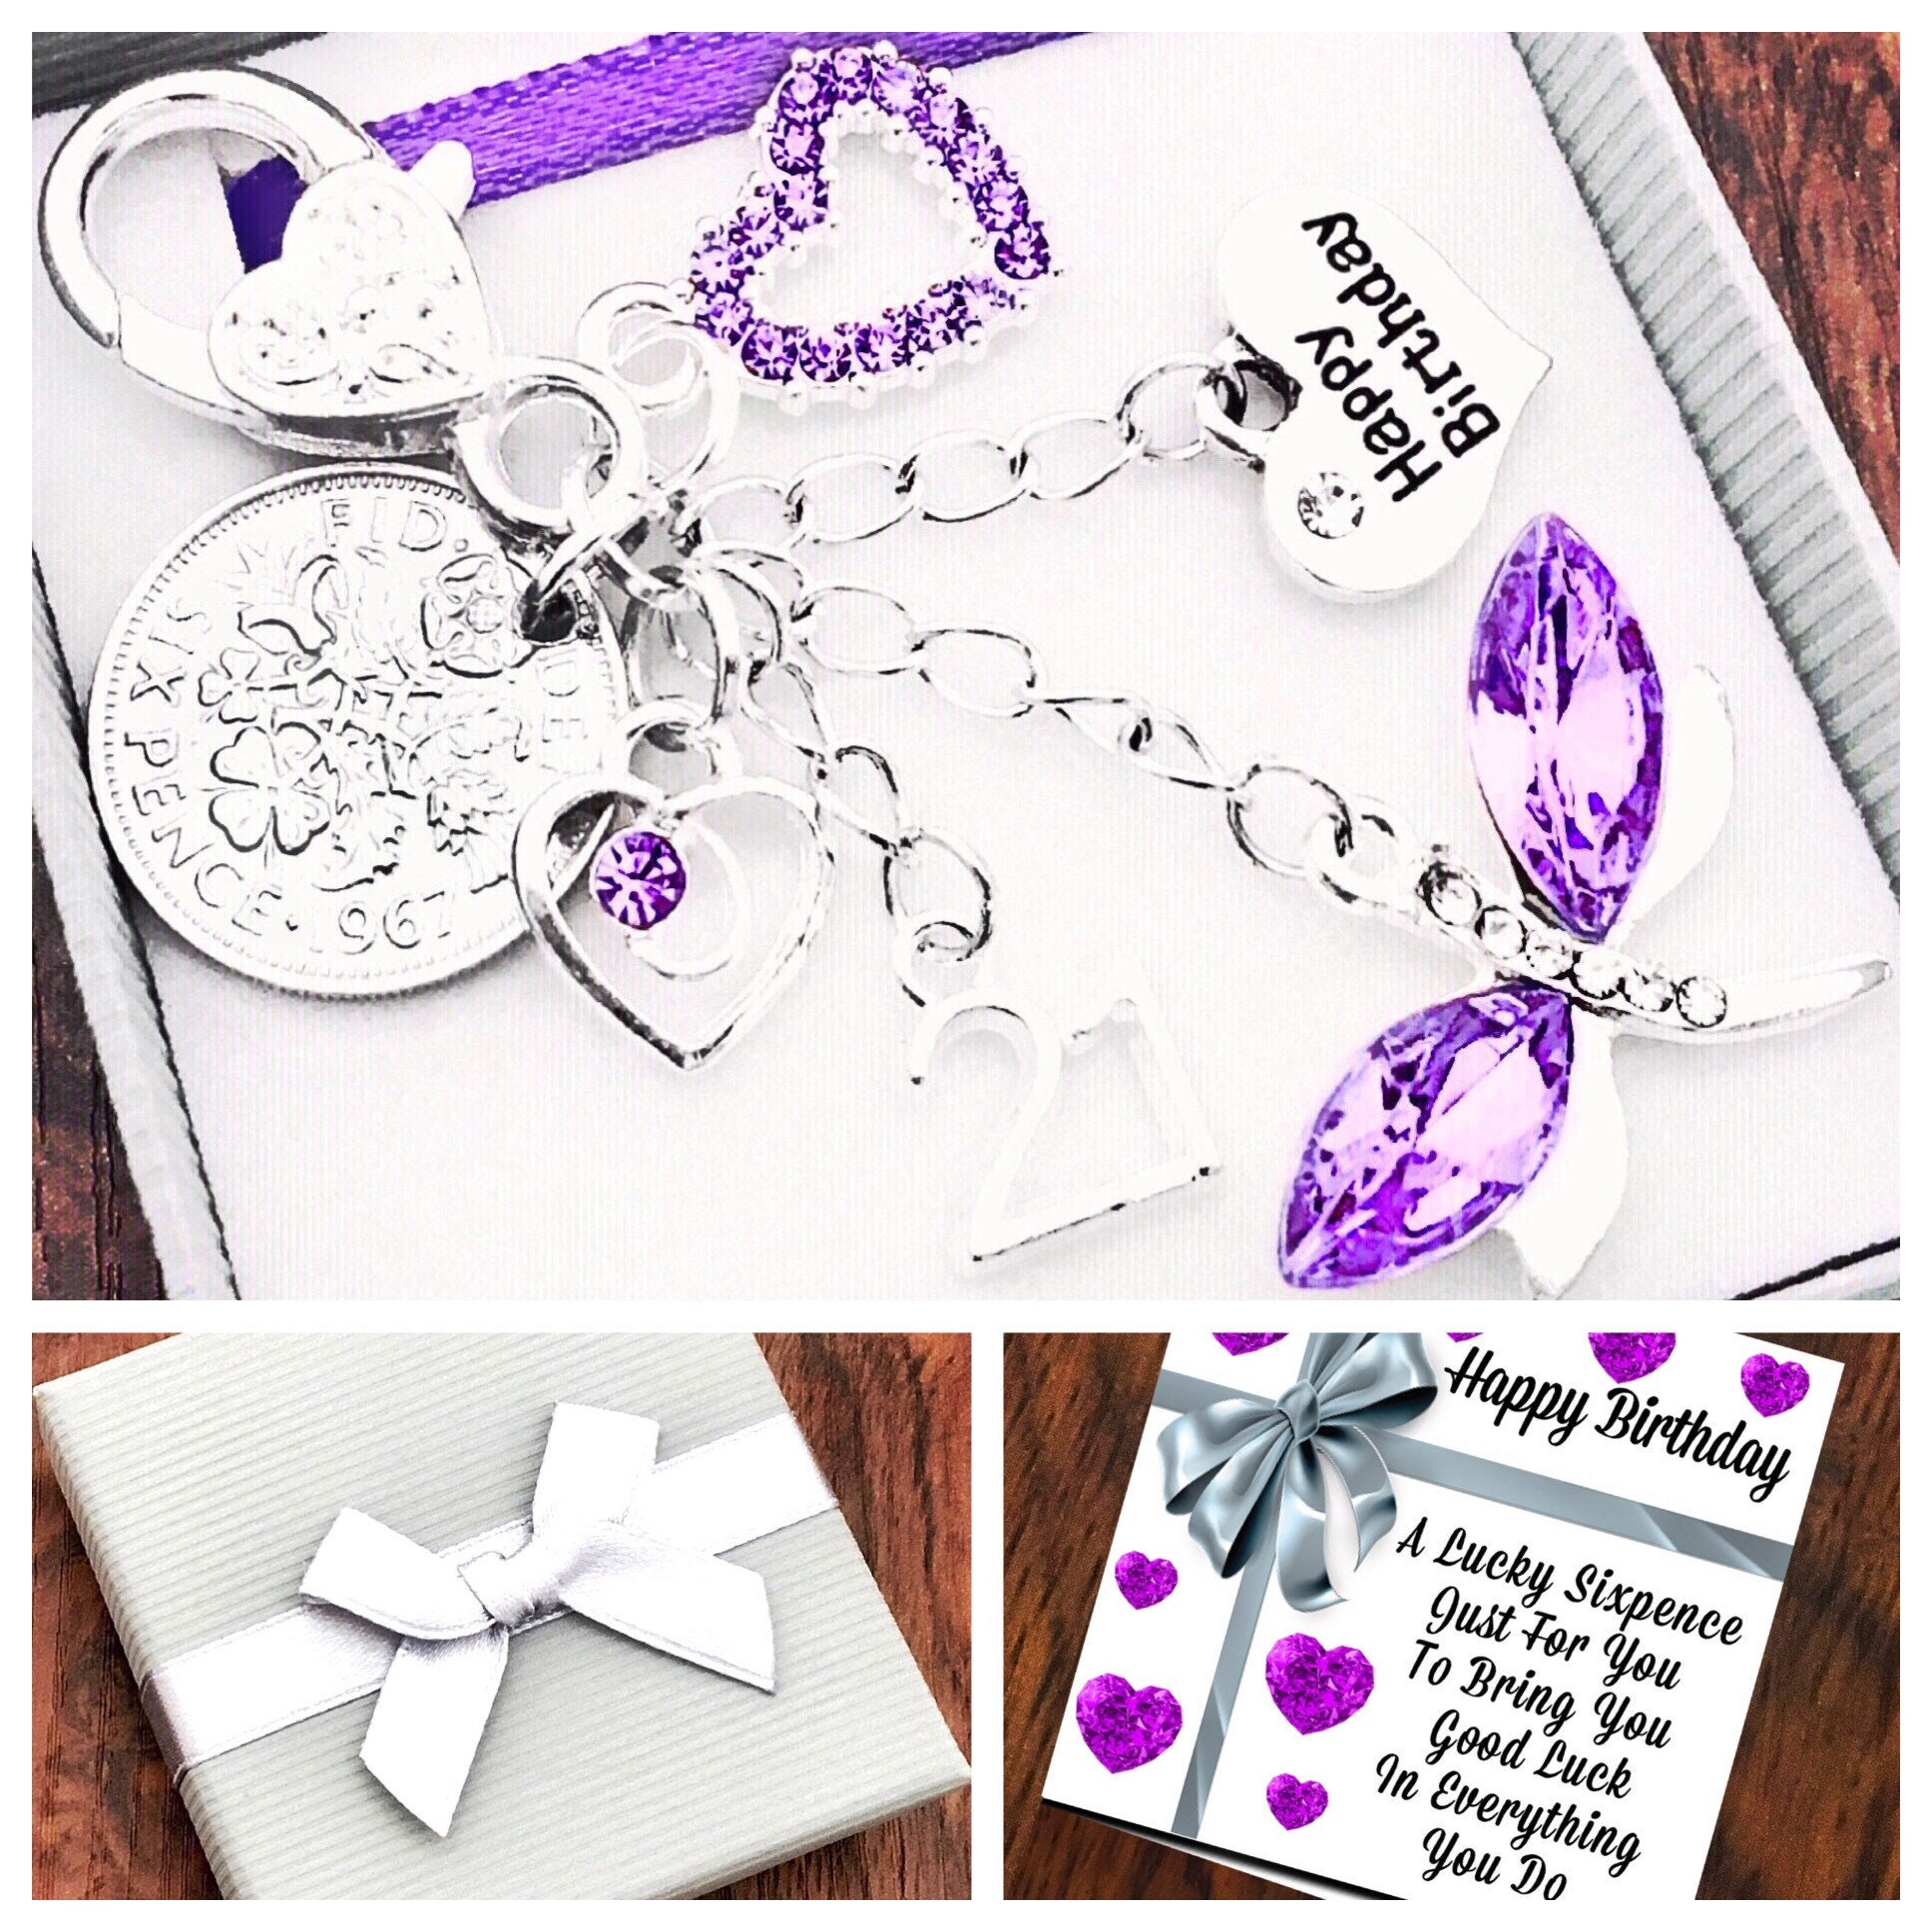 Happy 15th Birthday Gift, 15th Keepsake Purple Dragonfly Keyring, Lucky  Sixpence, Choice of Heart and Number Charm, Gift Box and Gift Card 